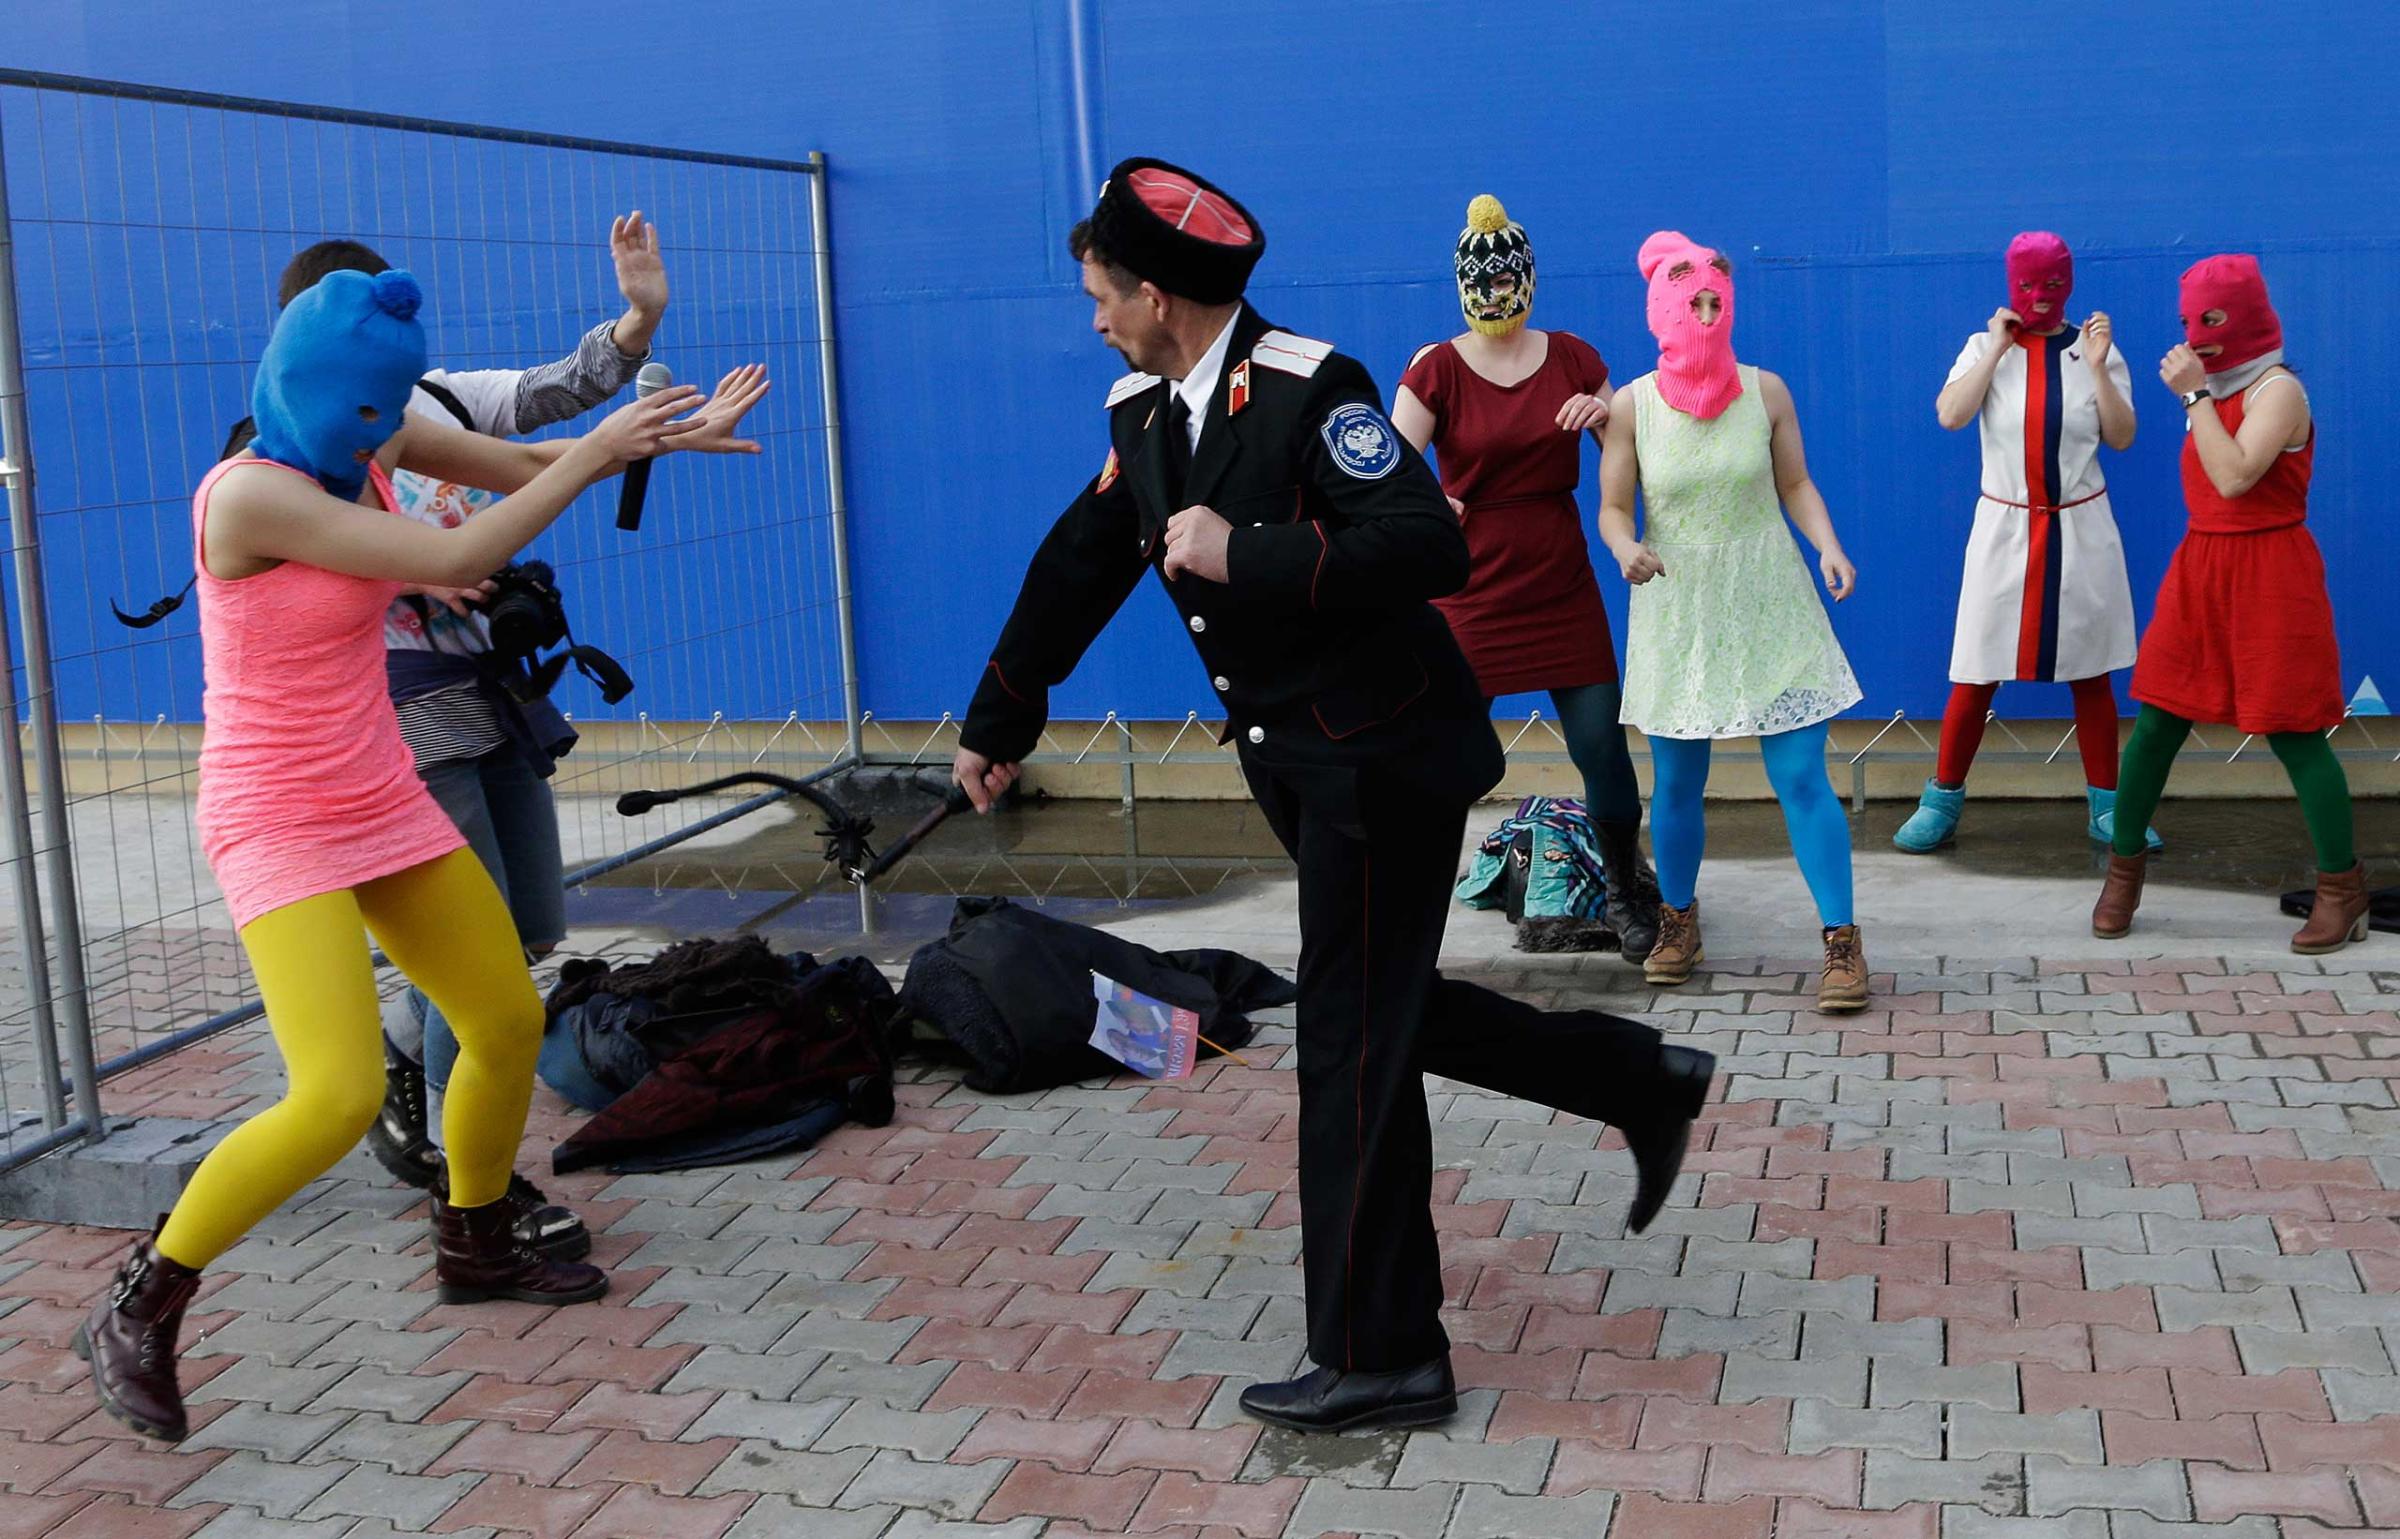 A Cossack militiaman attacks Nadezhda Tolokonnikova and a photographer as she and fellow members of the punk group Pussy Riot, including Maria Alekhina, center, in the pink balaclava, stage a protest performance in Sochi, Russia, Feb. 19, 2014.